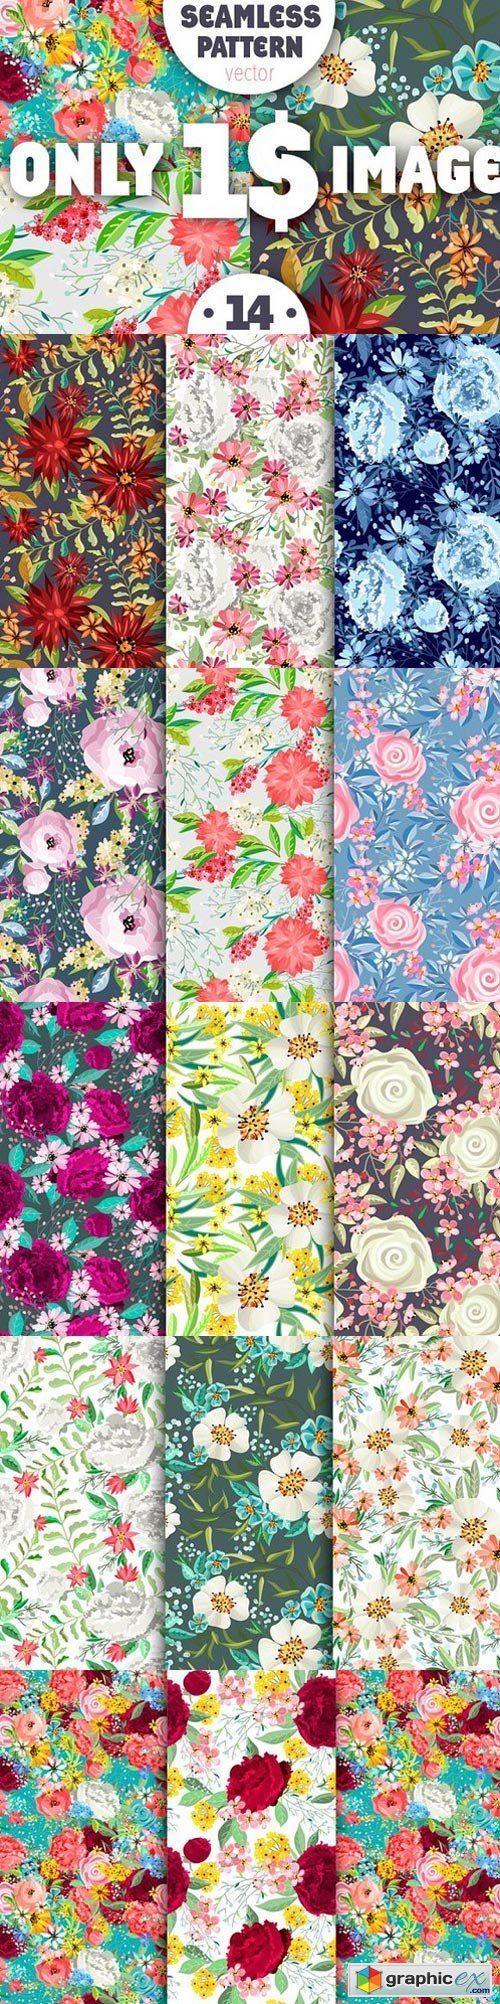 Pack of seamless patterns